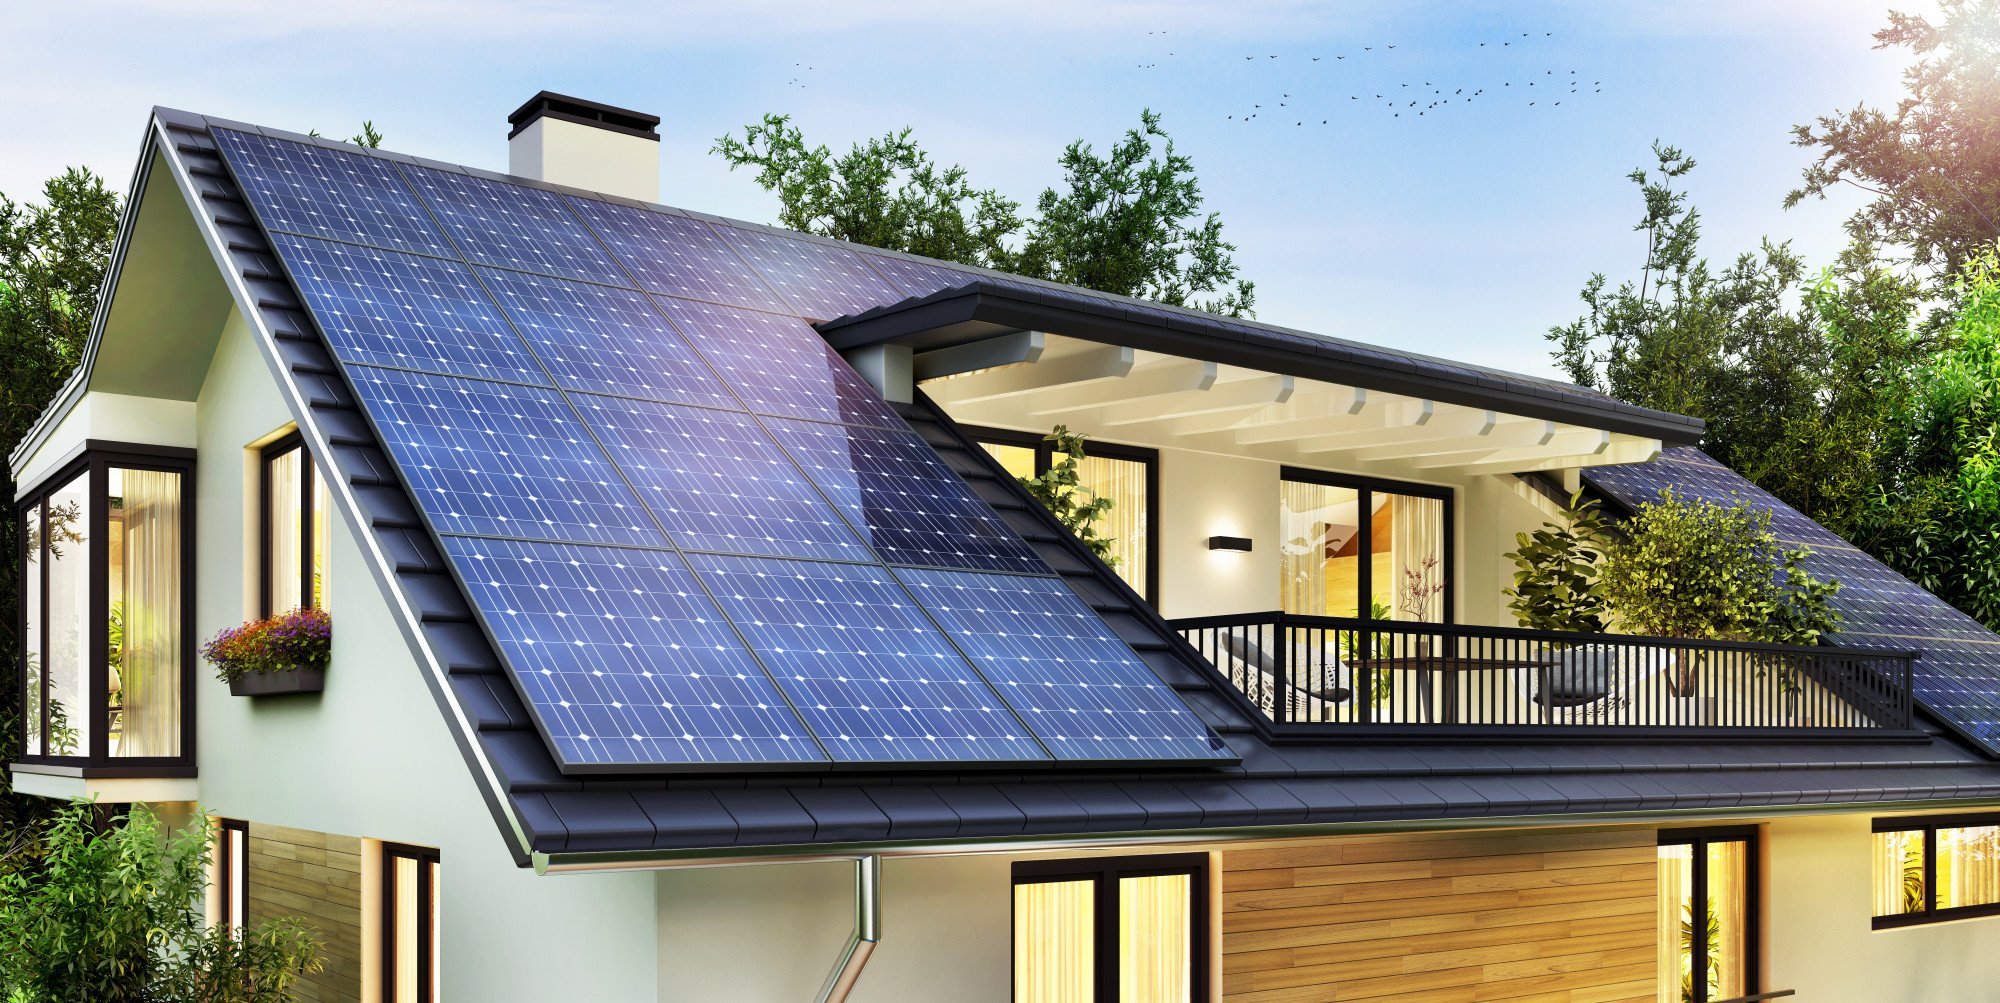 Are you wondering how to care for your home's roof? Click here for a guide to maintaining a metal roof with solar panels.